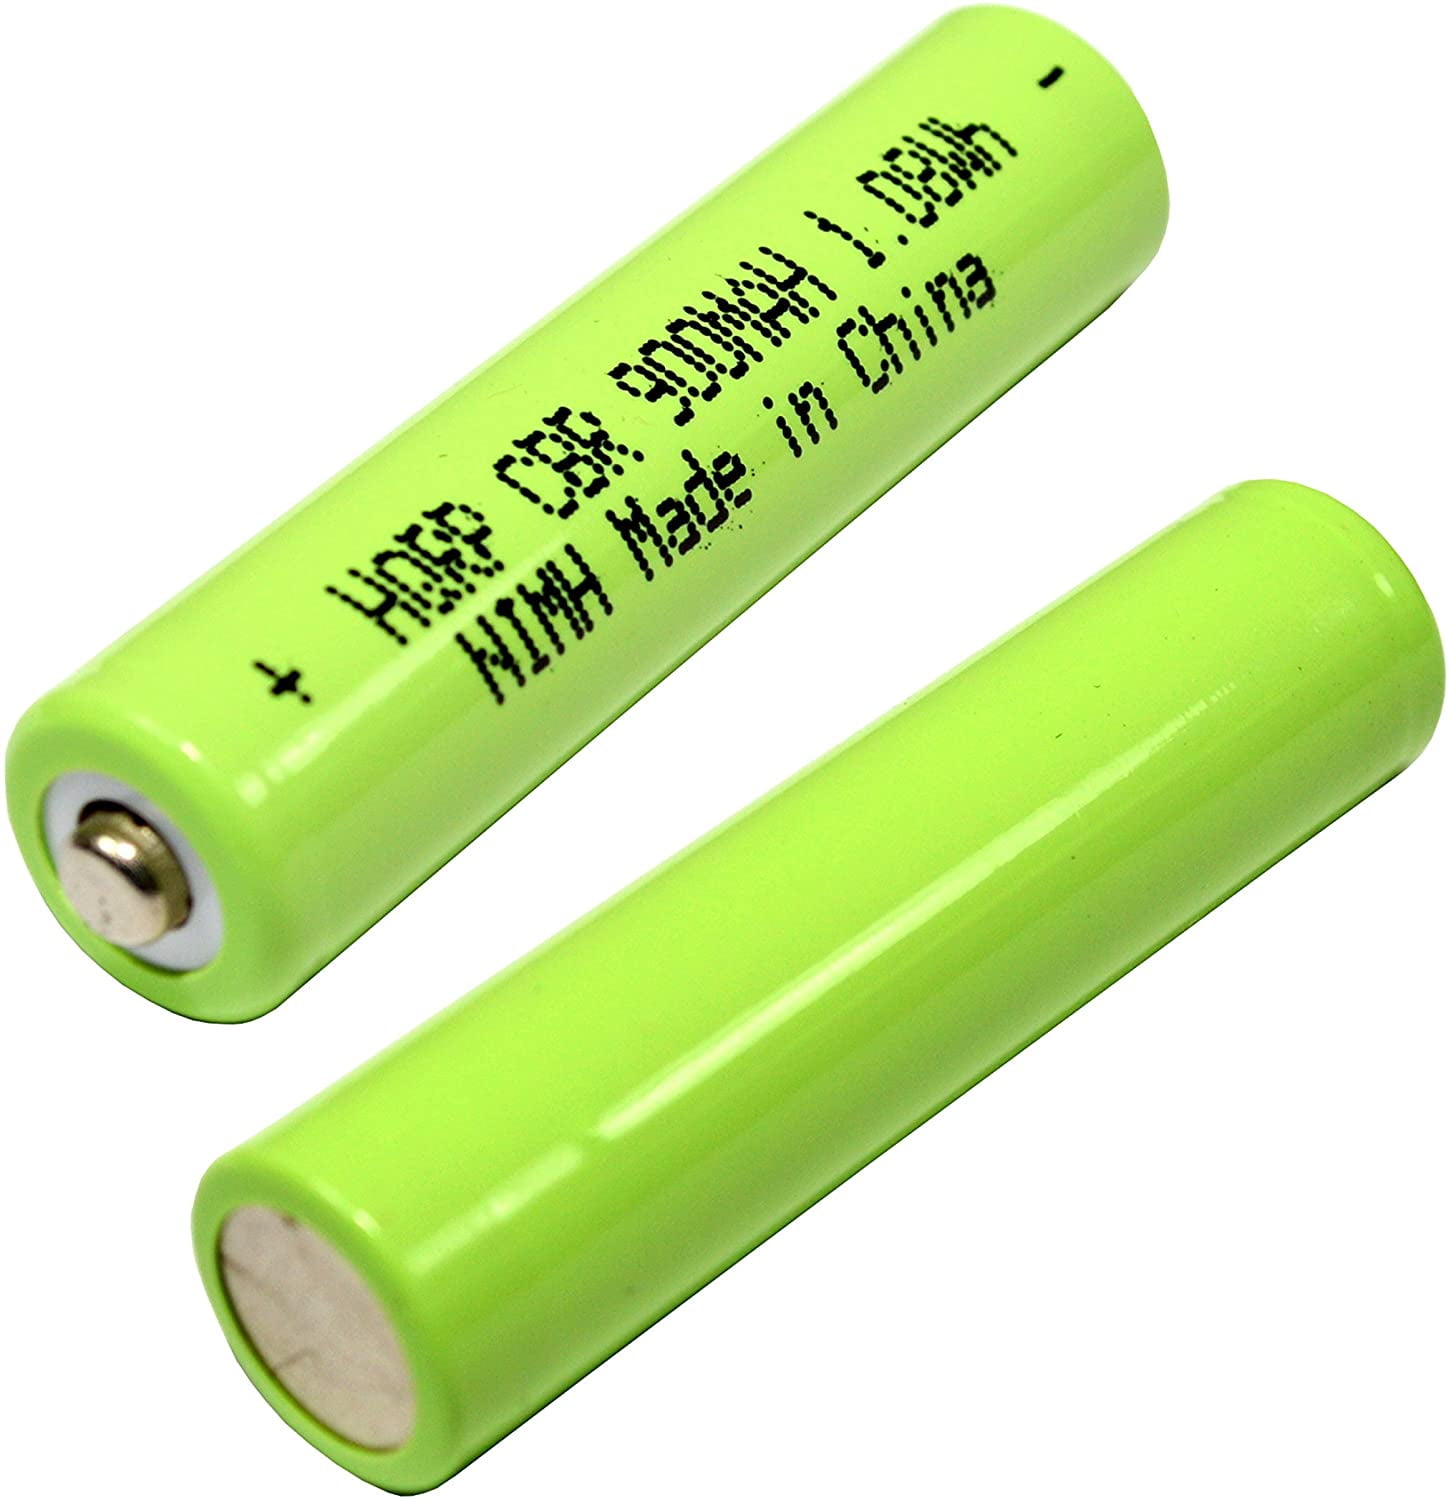 HQRP TWO Rechargeable Batteries compatible with Sennheiser RS120, RS130, RS160, RS170, RS Headphones - Walmart.com